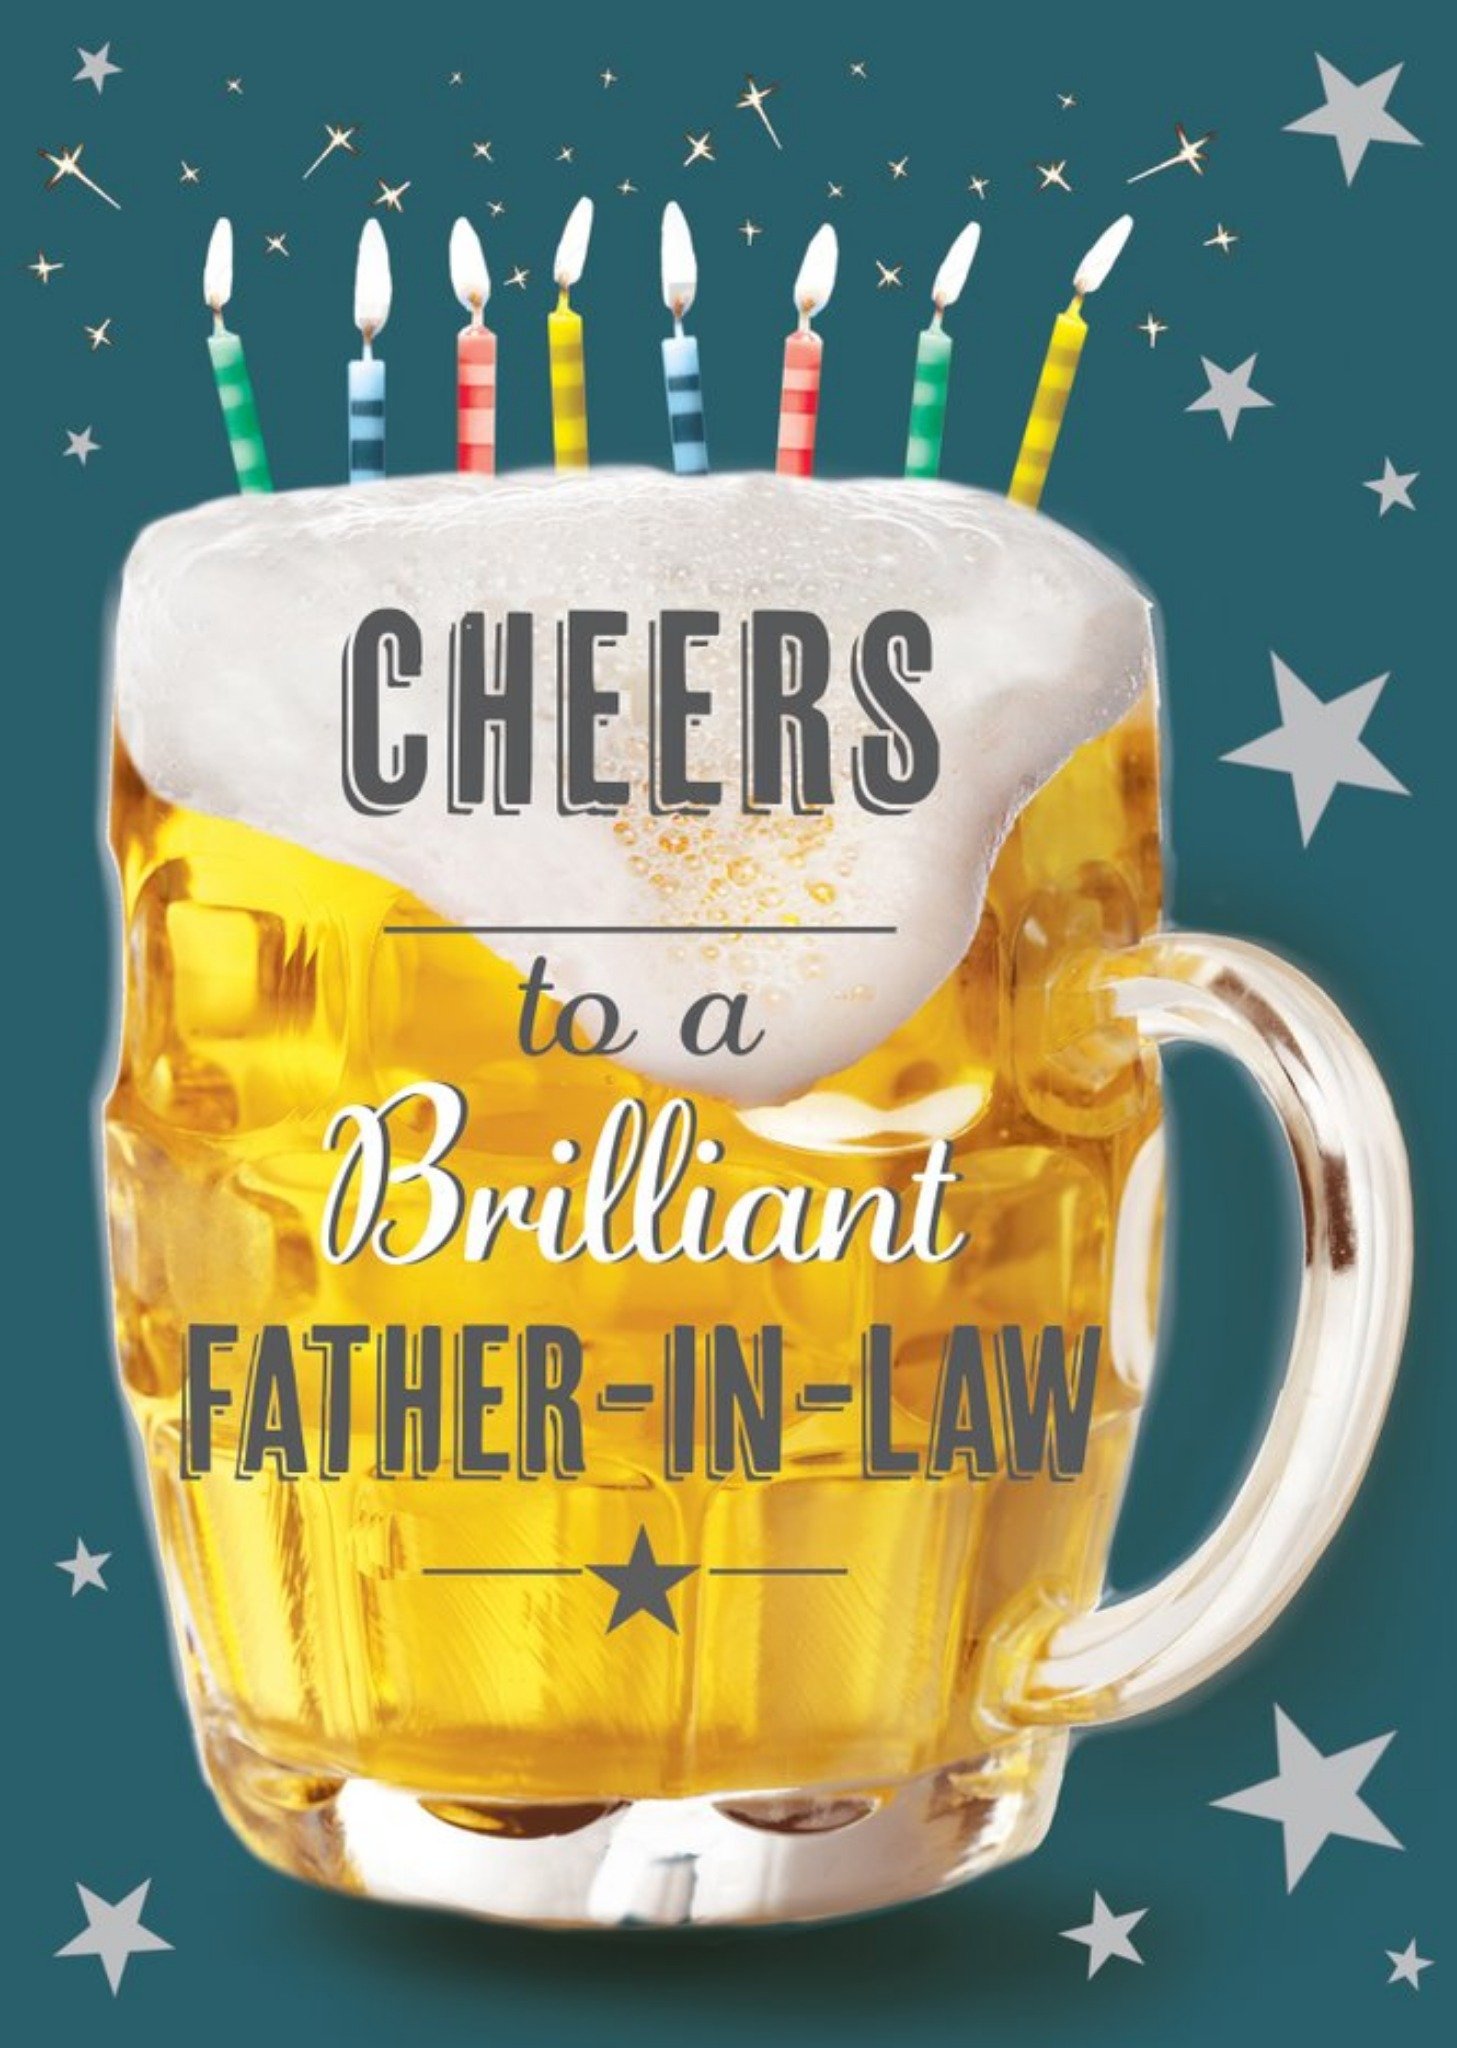 Moonpig Clintons Illustrated Pint Of Beer Cheers To A Brilliant Father In Law Card, Large